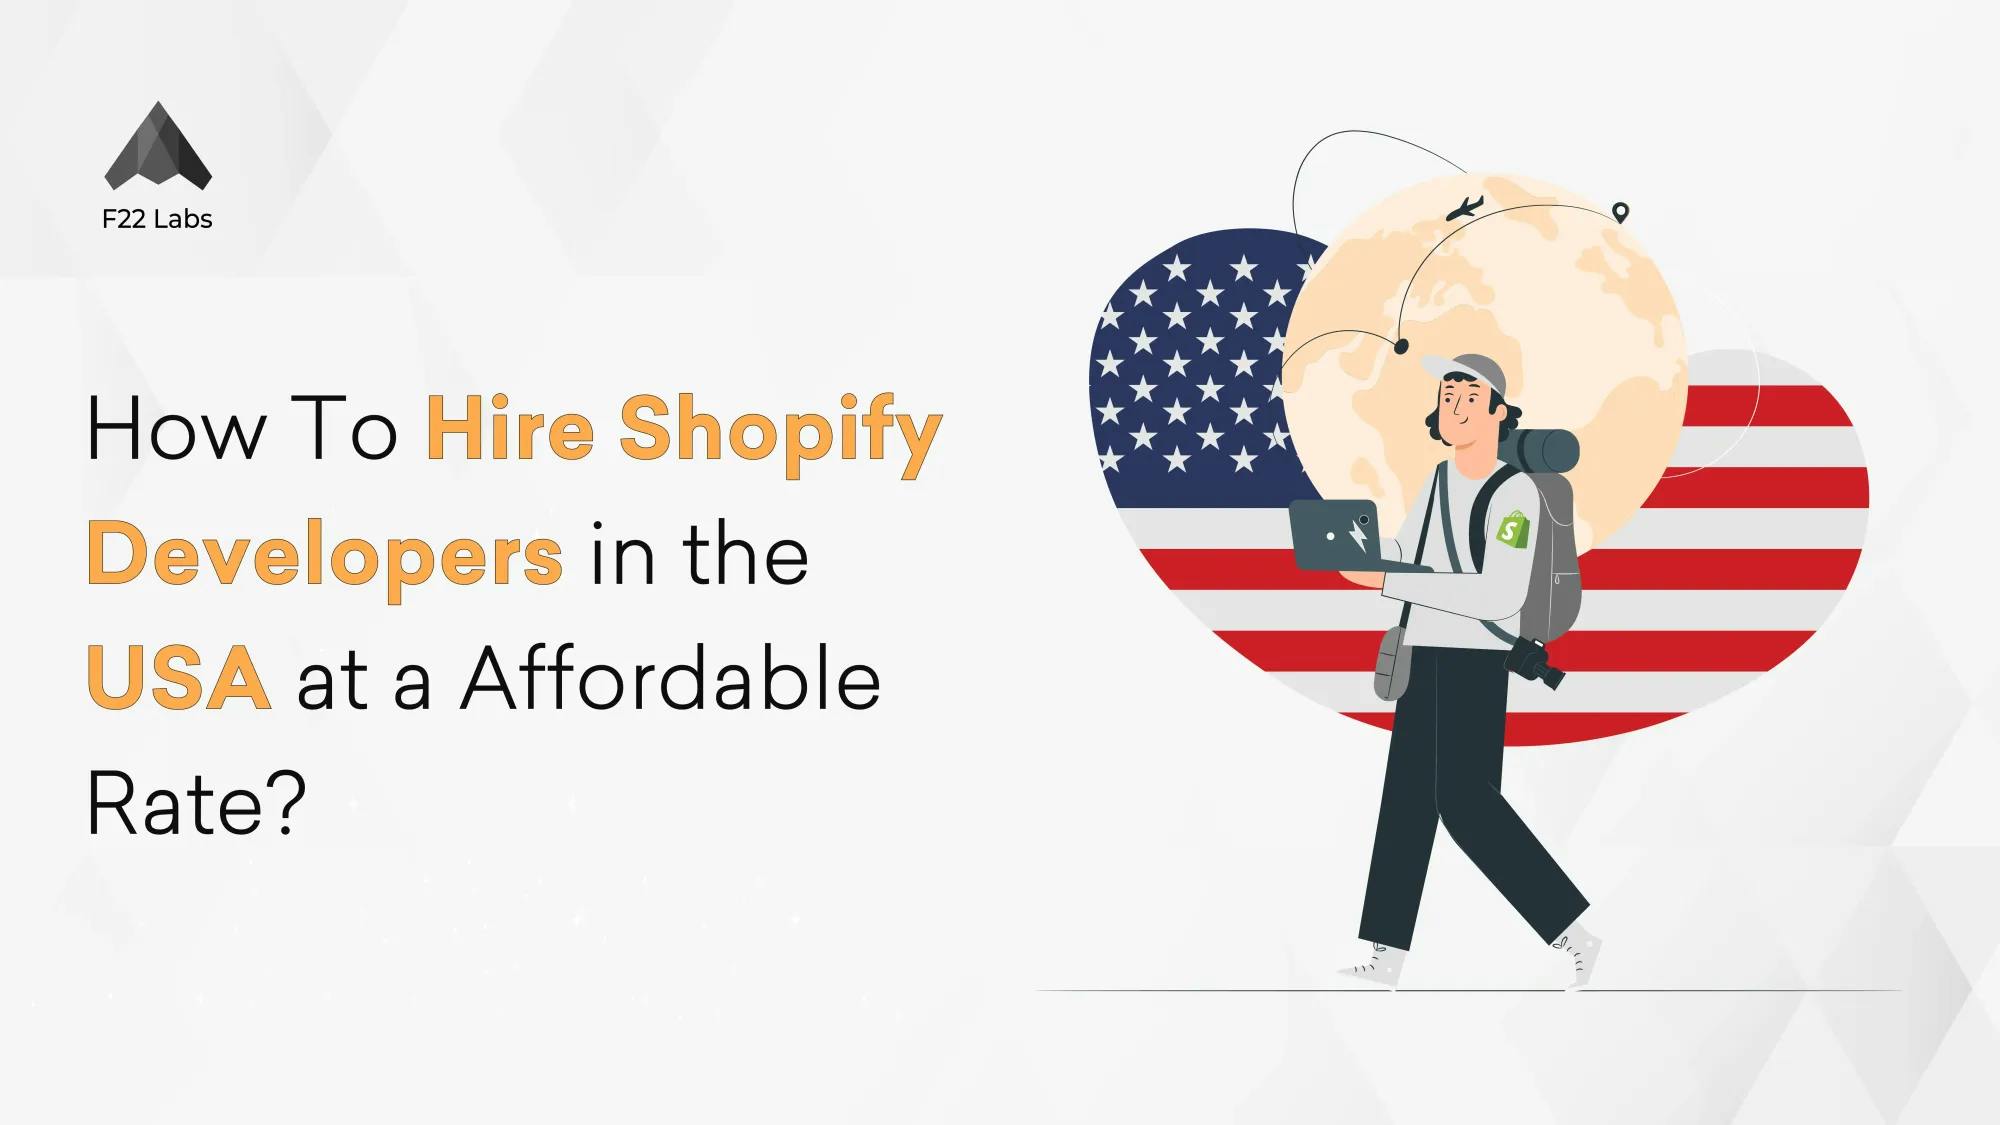 How To Hire Shopify Developers in the USA at an Affordable Rate? Hero